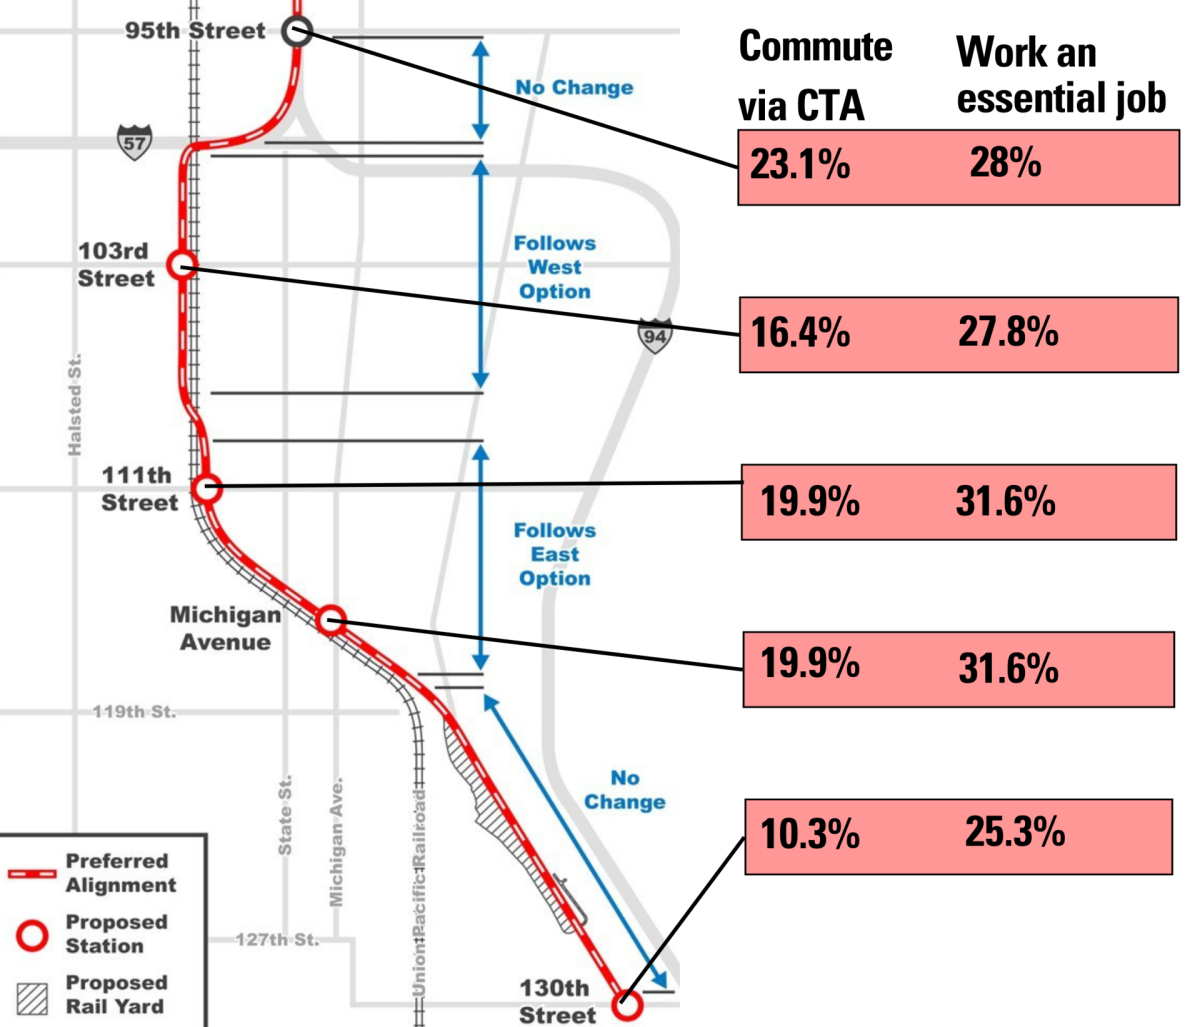 Percentage of essential works and CTA commuters in proximity to the proposed stations